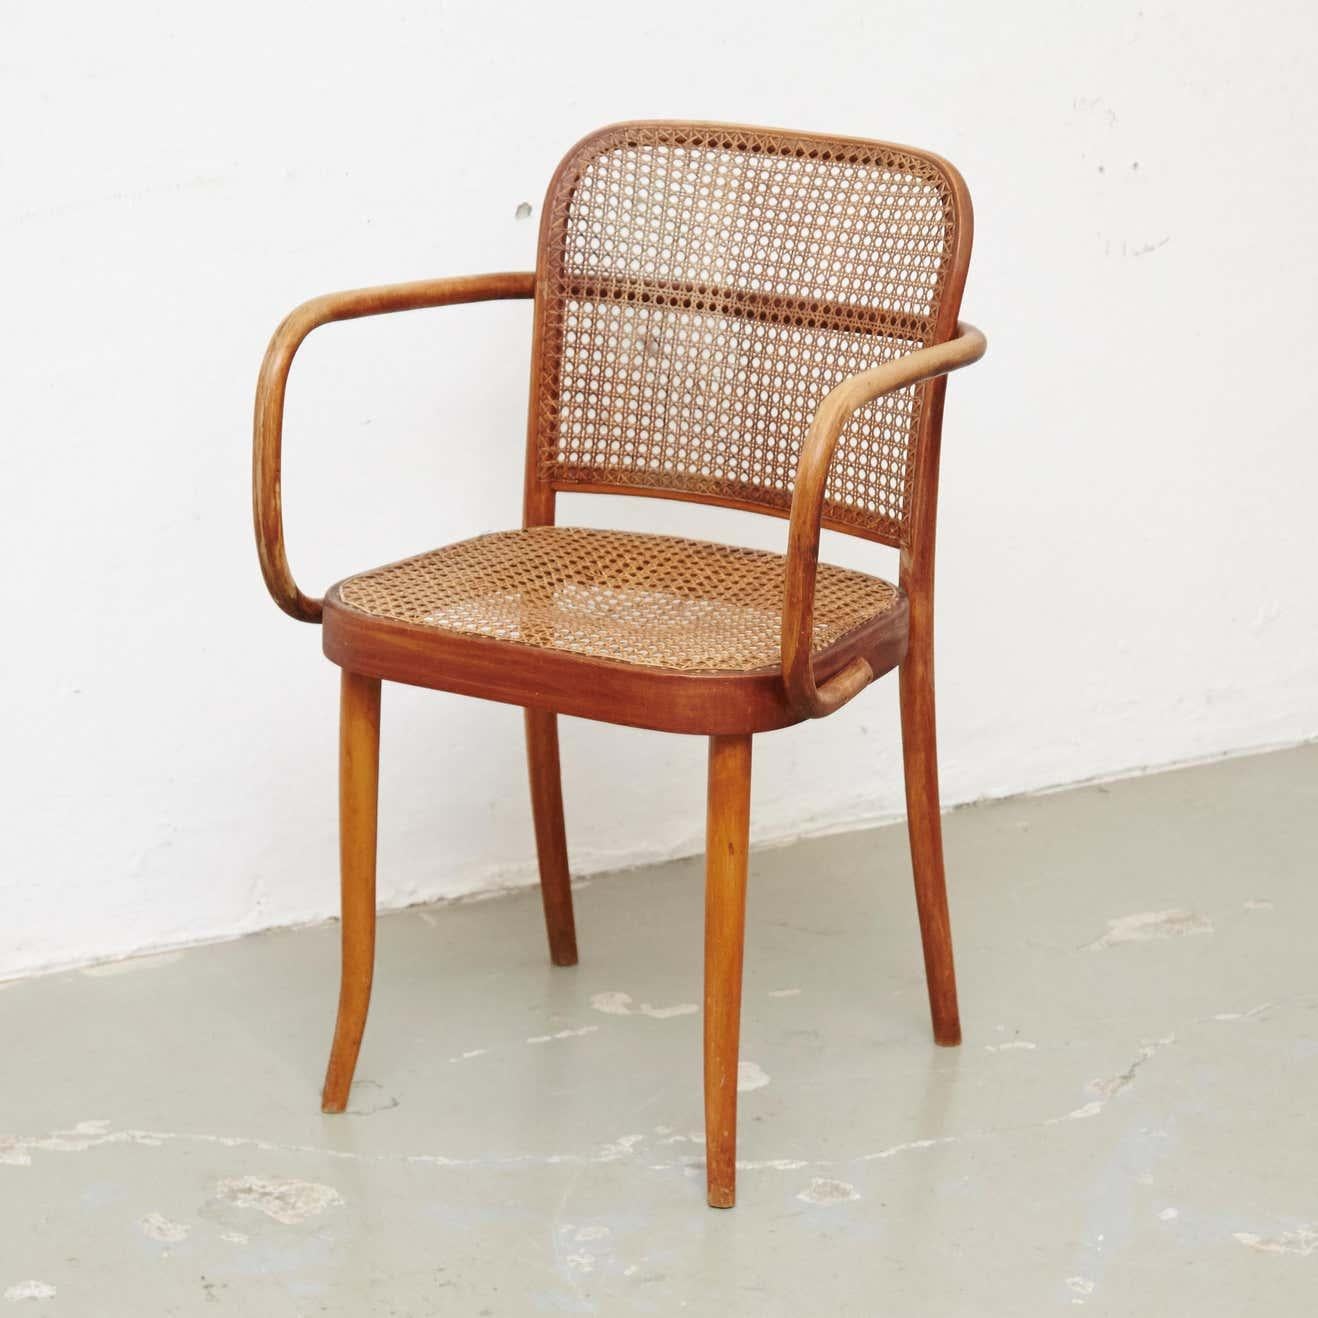 Josef Hoffmann chair, Austria.

In original condition, with minor wear consistent with age and use, preserving a beautiful patina.

Josef Hoffmann (December 15, 1870-May 7, 1956) was an Austrian architect and designer of consumer